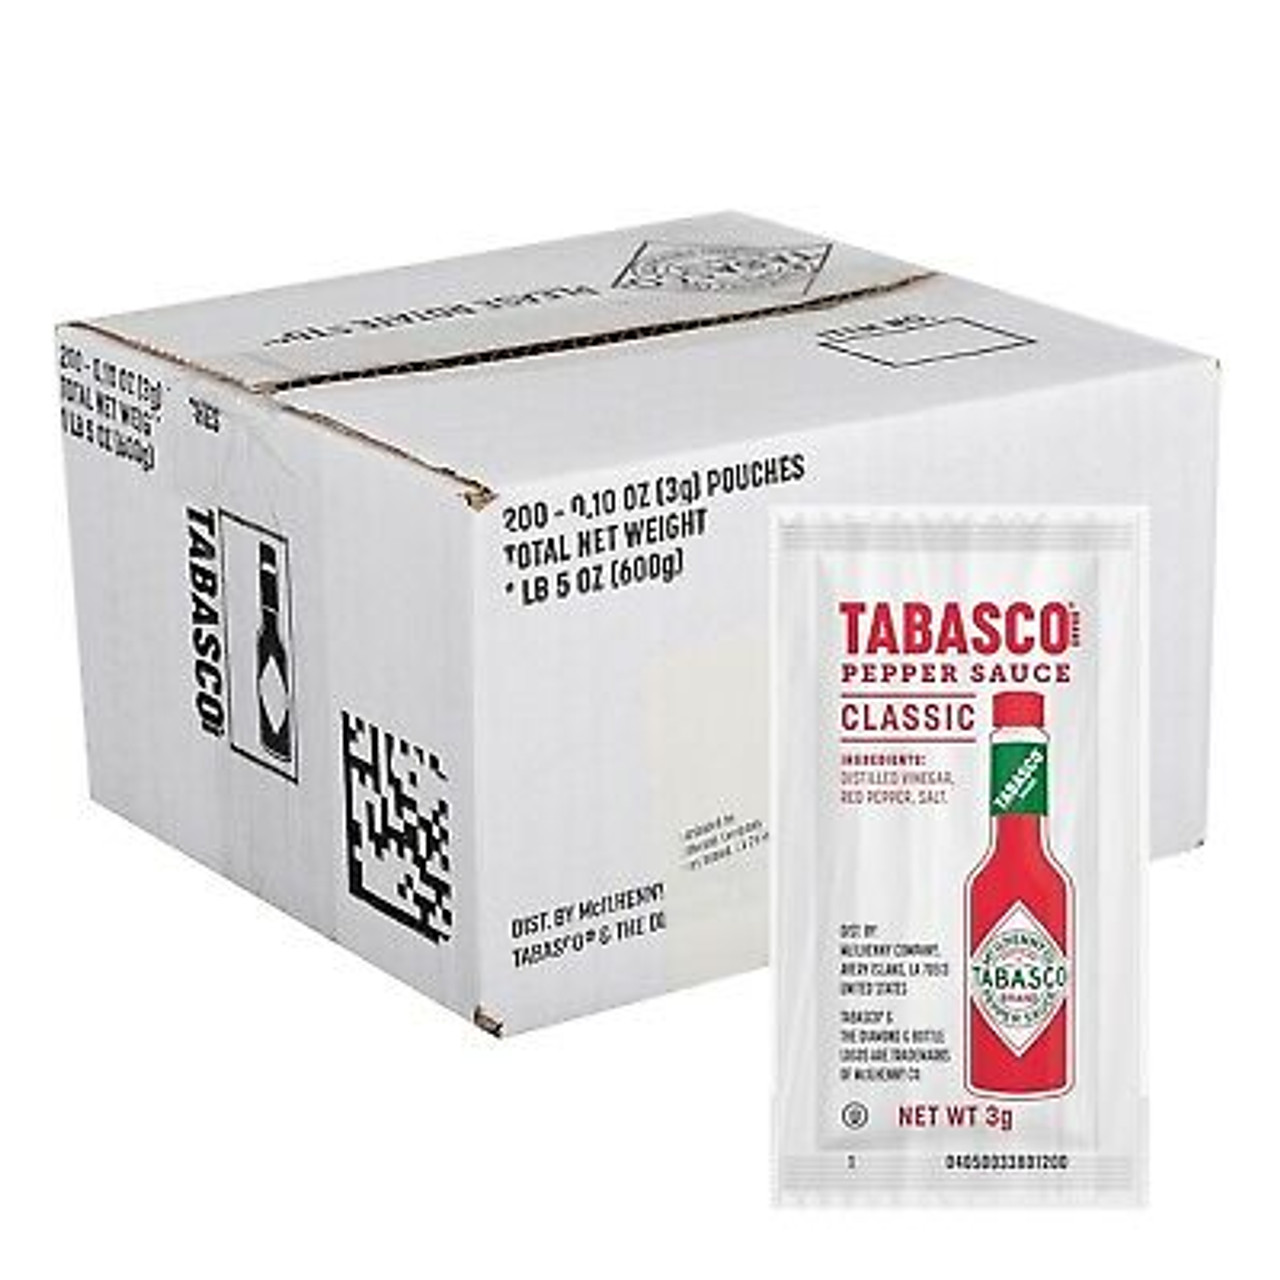 TABASCO® Original Hot Sauce Aged Pepper Portion Packets - 3g, 200/Case - Chicken Pieces